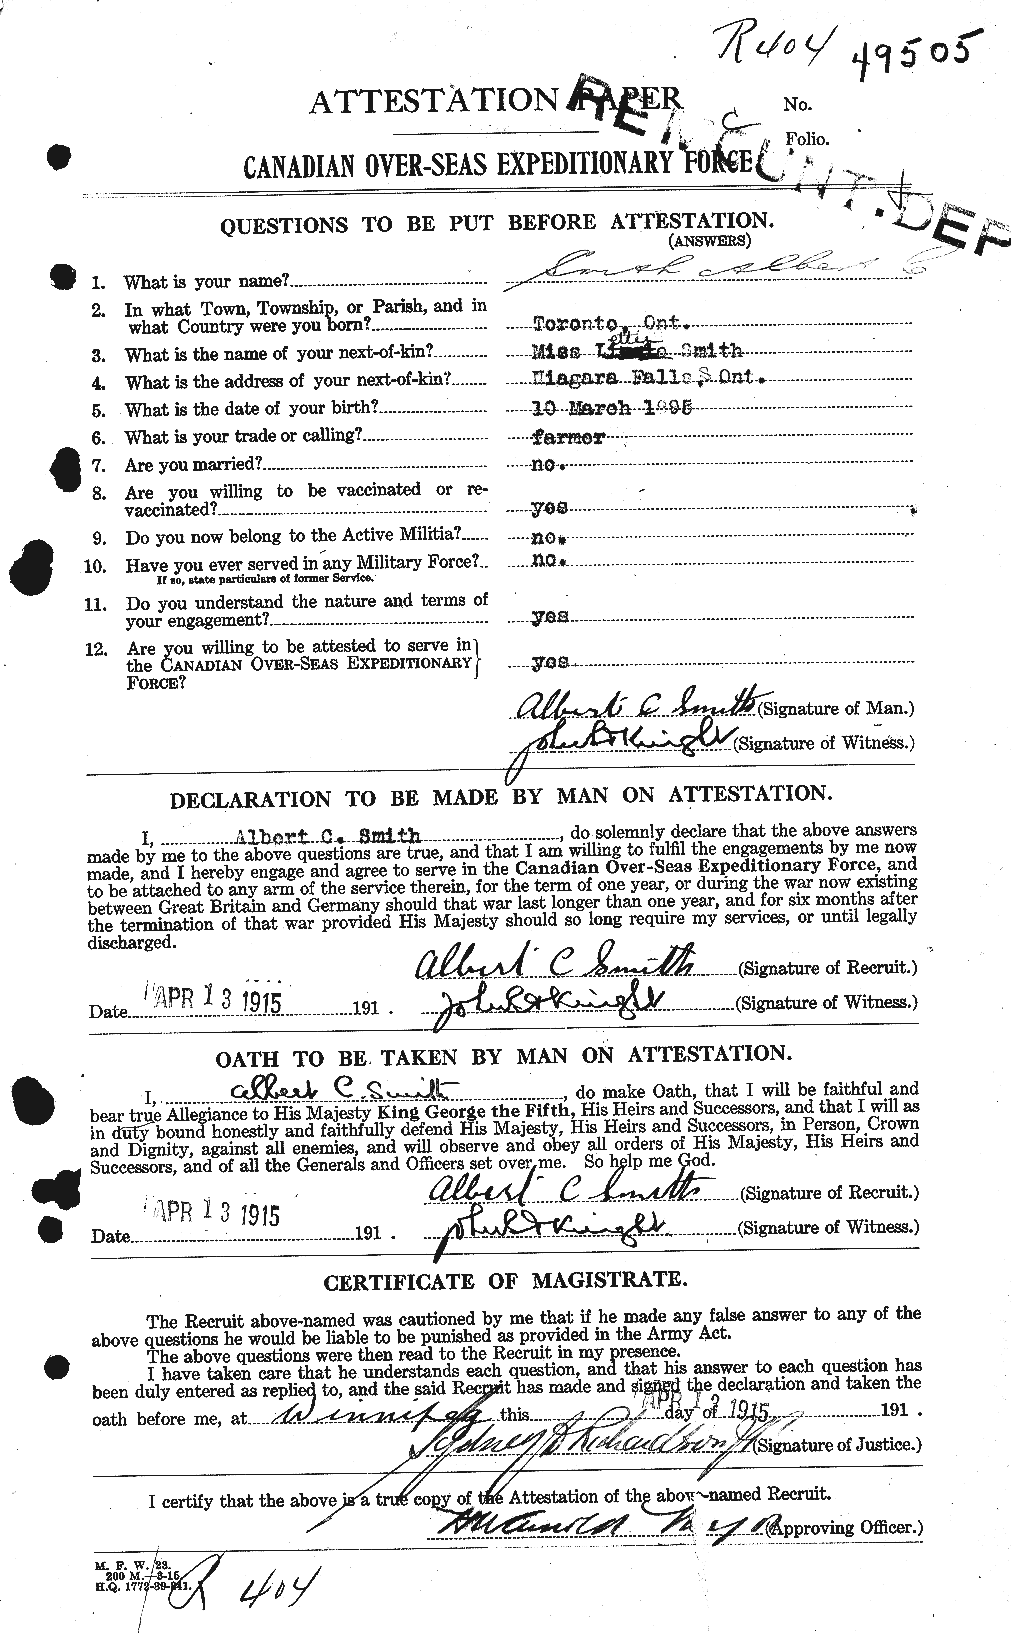 Personnel Records of the First World War - CEF 098960a